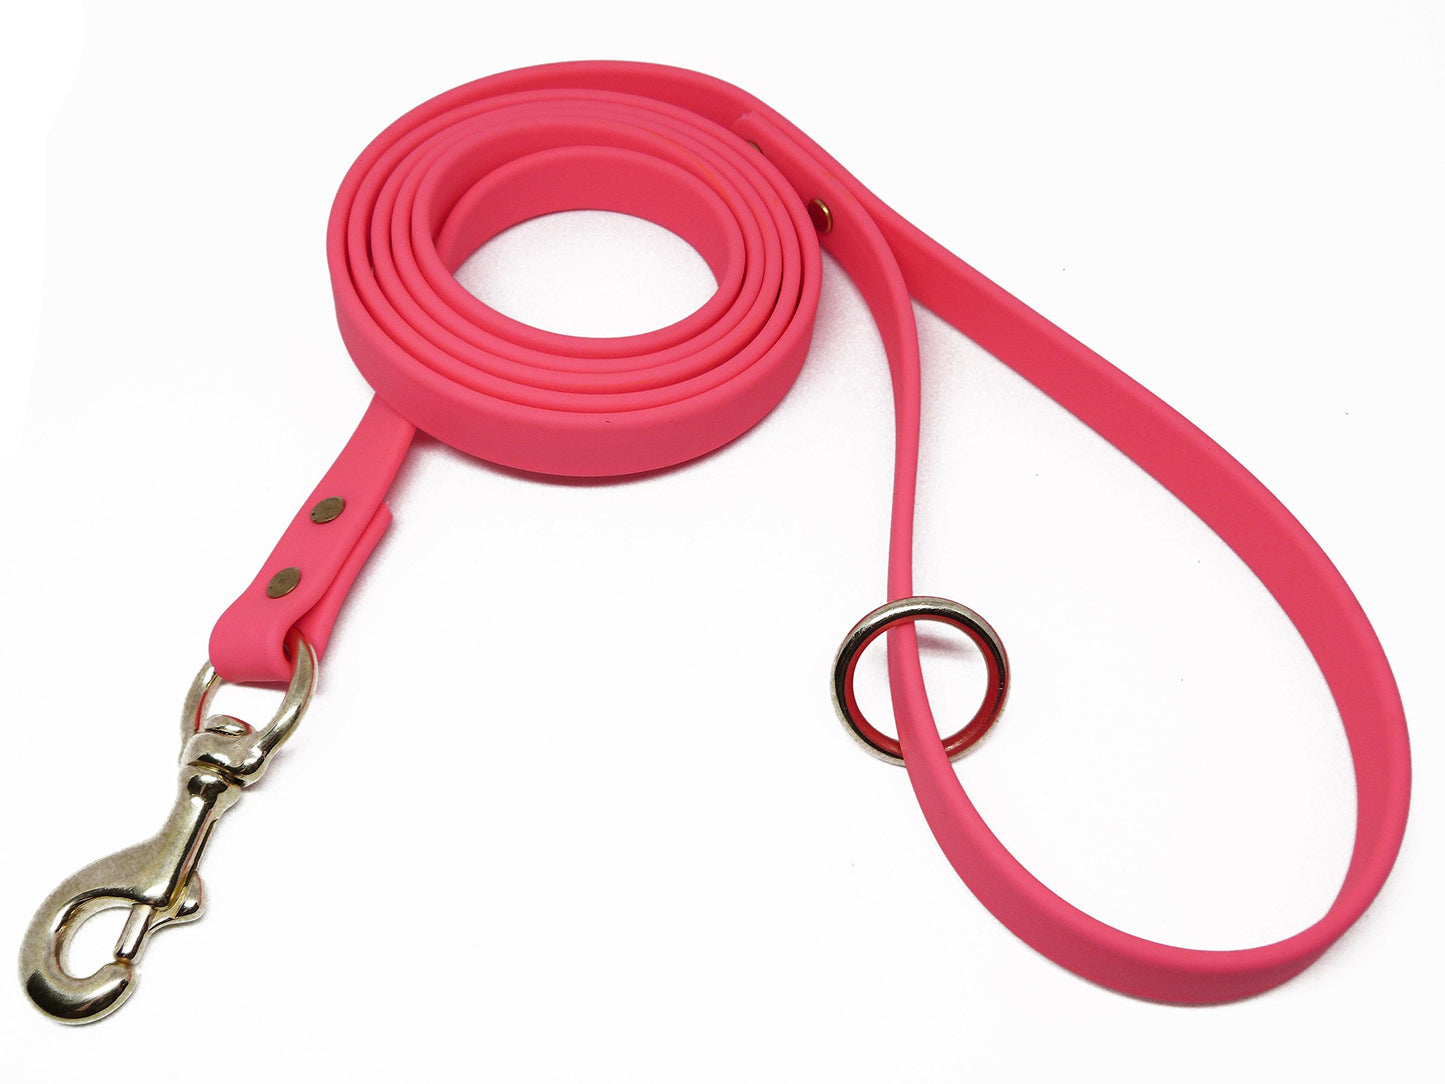 Jim Hodges Dog Training Gummy Dog Leash, Biothane, Dog Training Leash, Waterproof, Weatherproof, 6 Foot Length for Small, Medium & Large Dogs or Puppies, Various Sizes & Colors